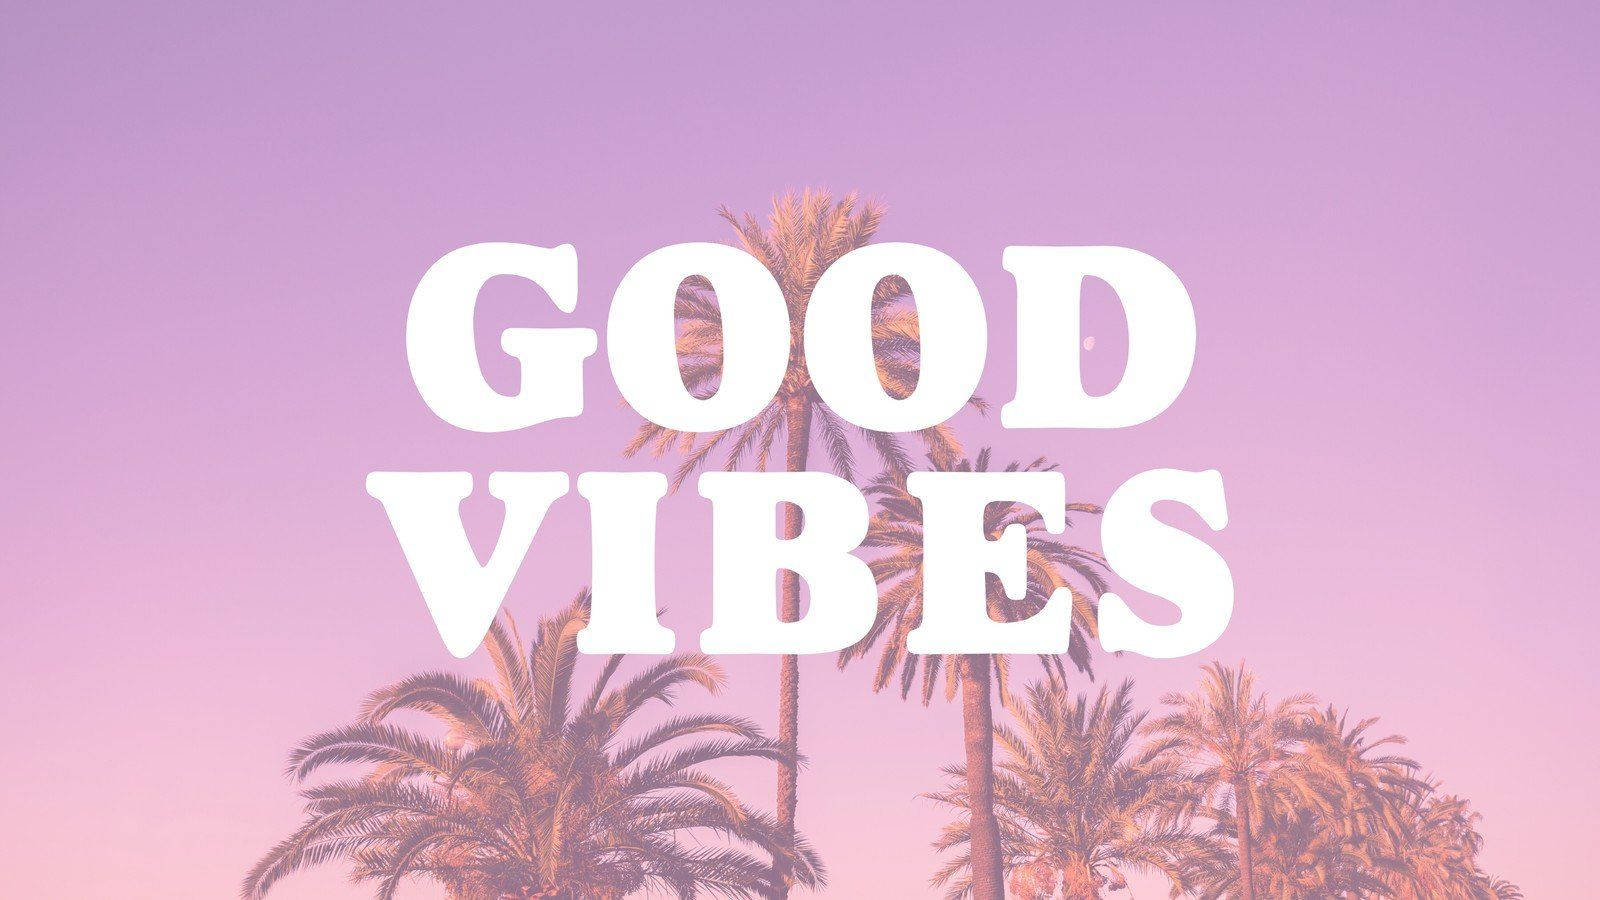 A purple sky with palm trees and the words good vibes - 